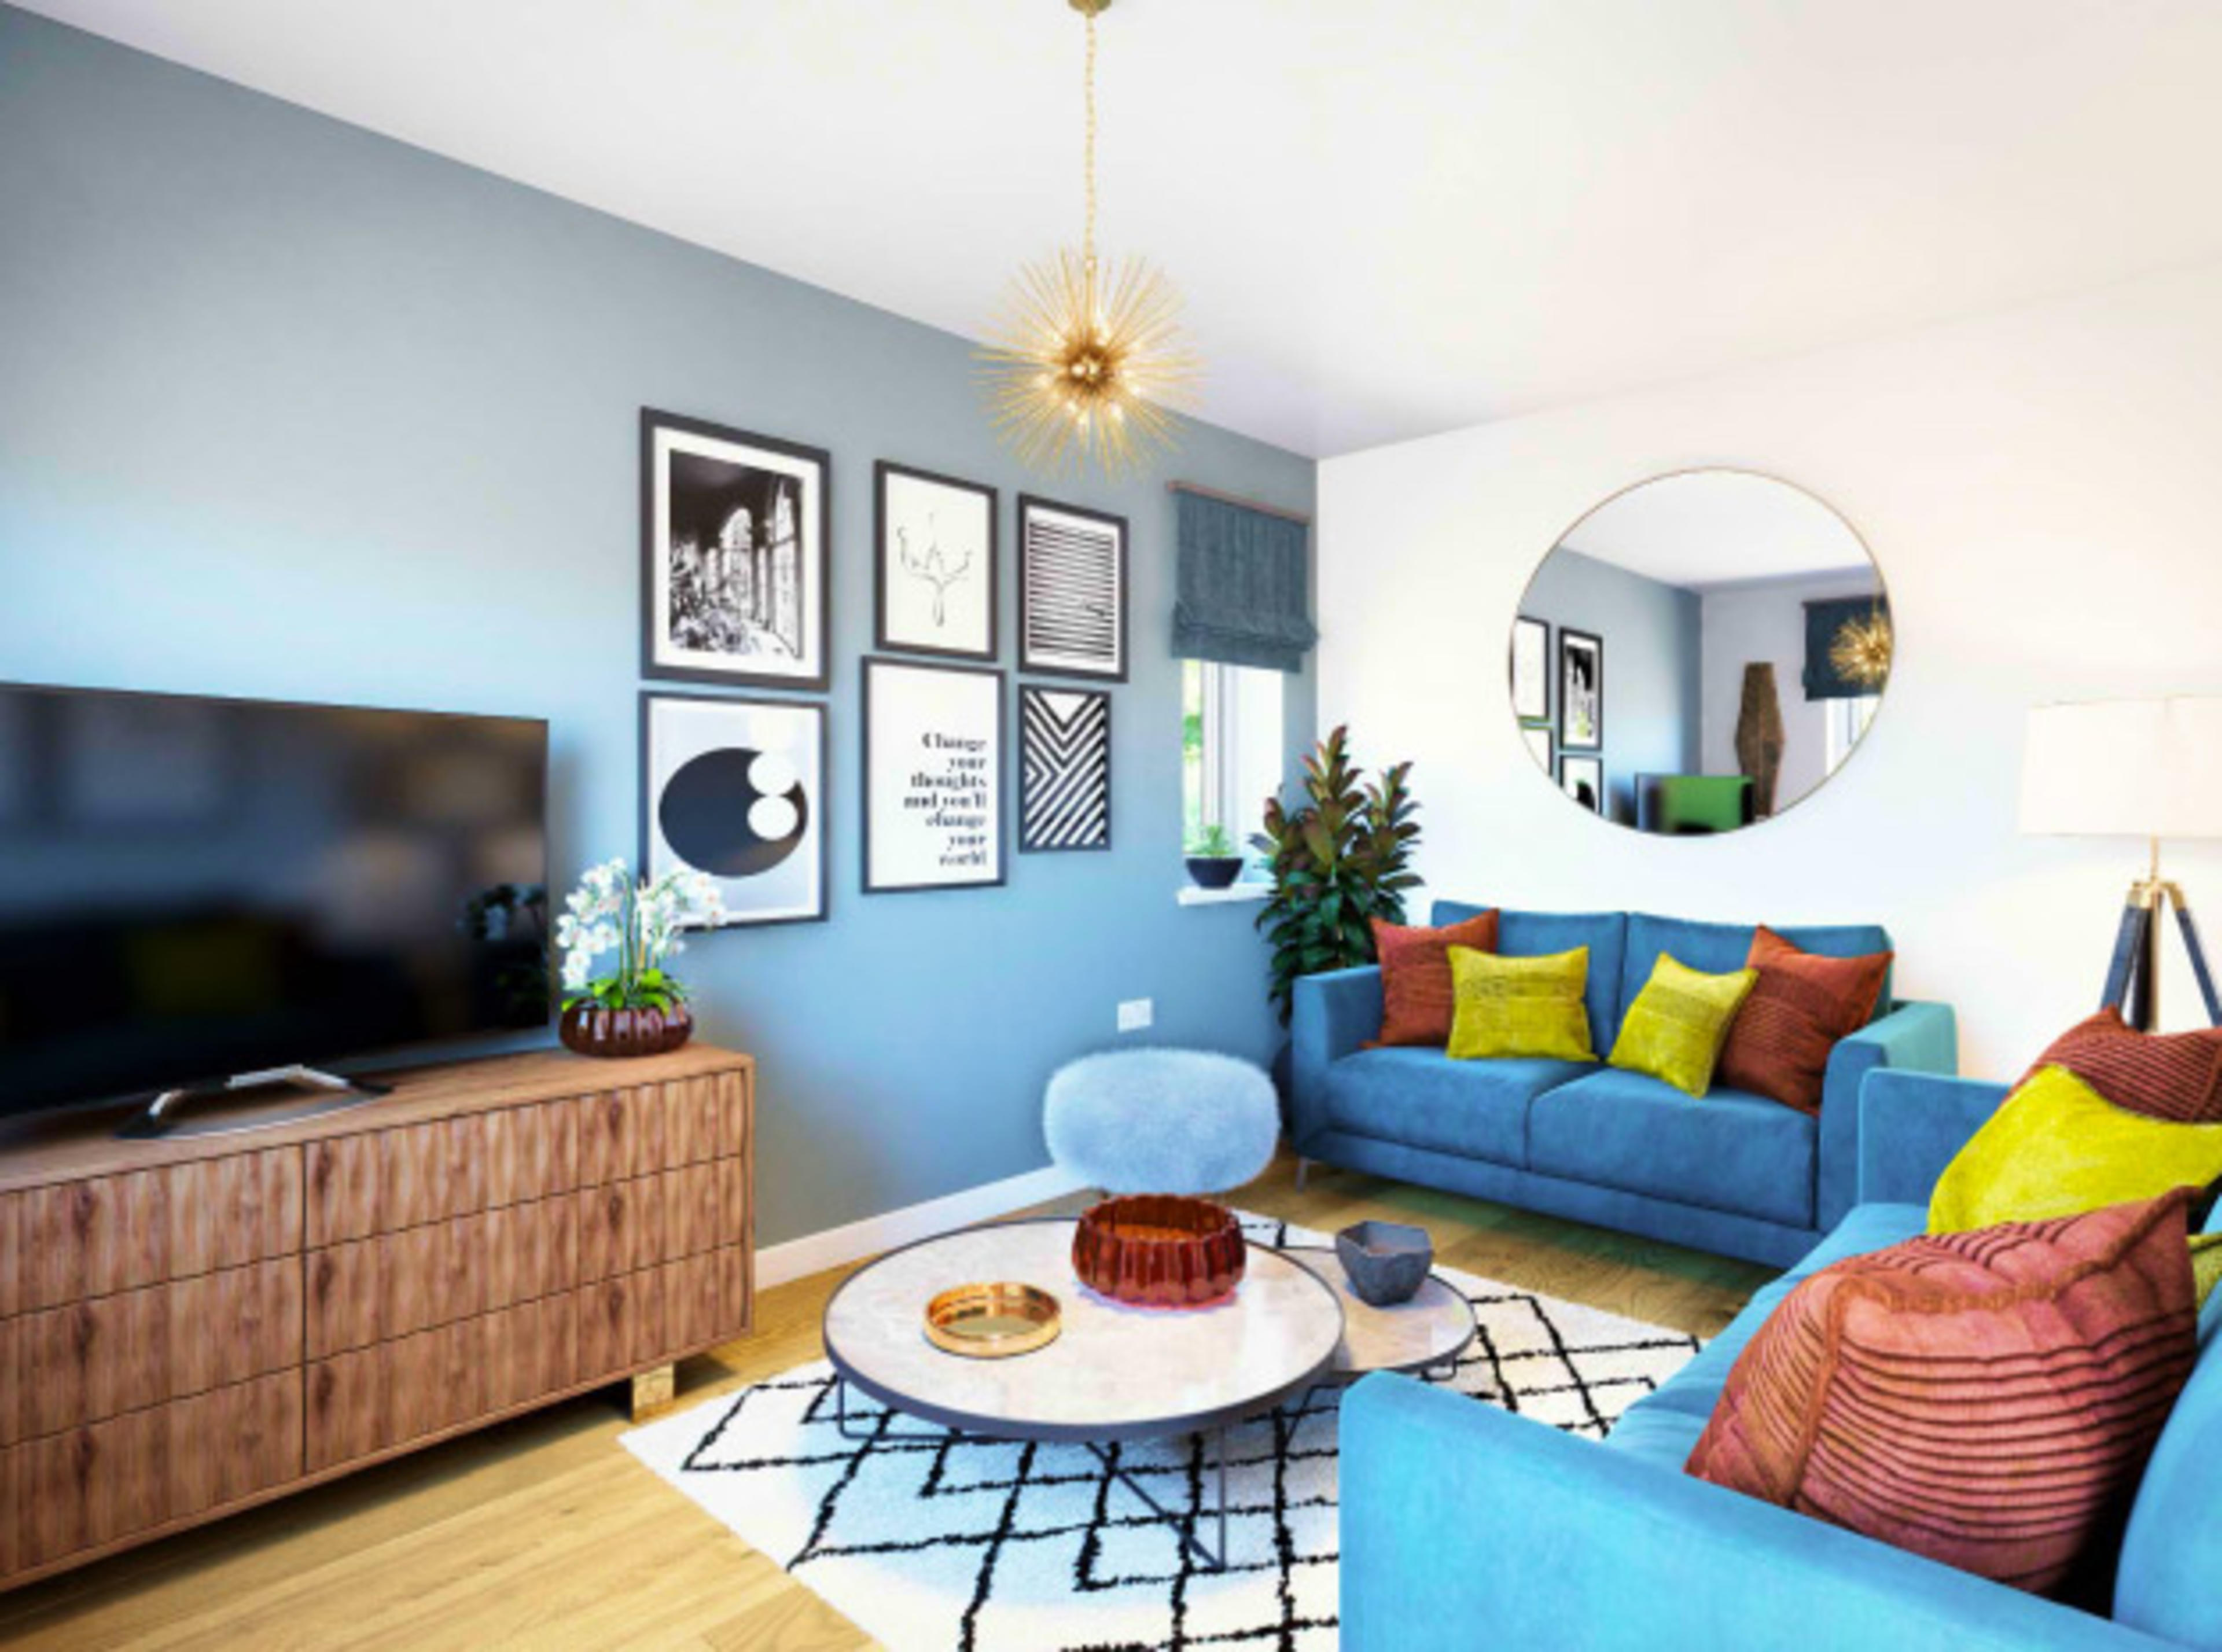 Living room with two blue sofas and flat screen TV on a media unit